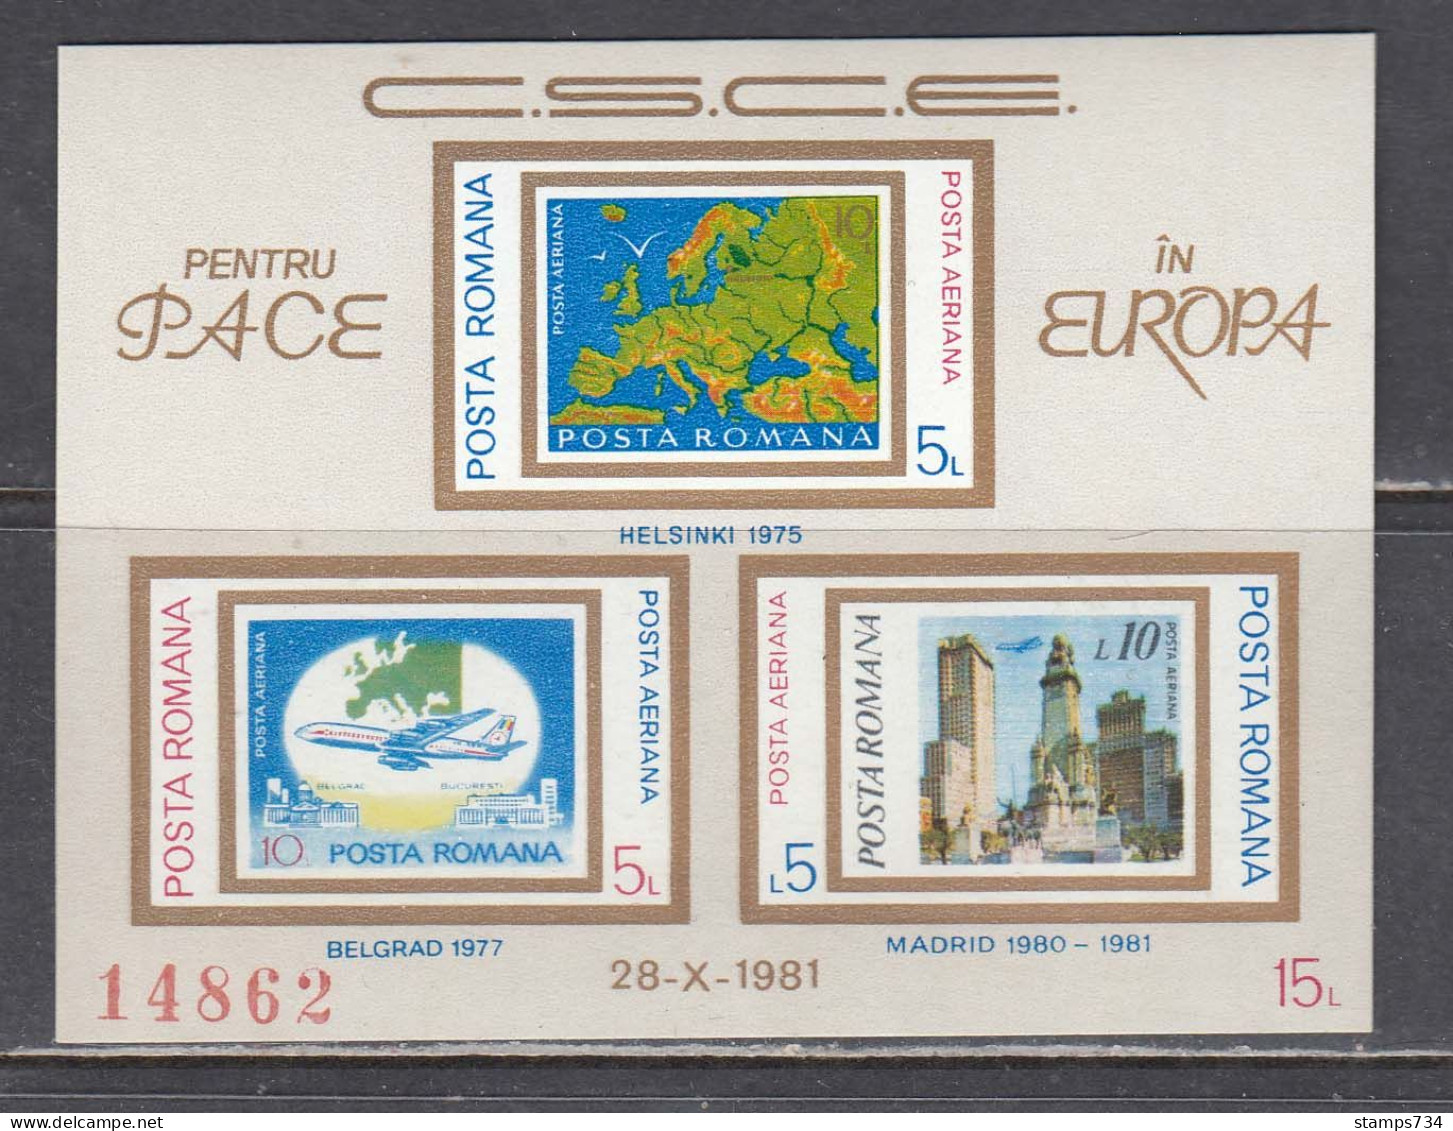 Romania 1981 - Conference On Security And Cooperation In Europe (CSCE), Madrid, Mi-Nr. Bl. 183, MNH** - Nuovi